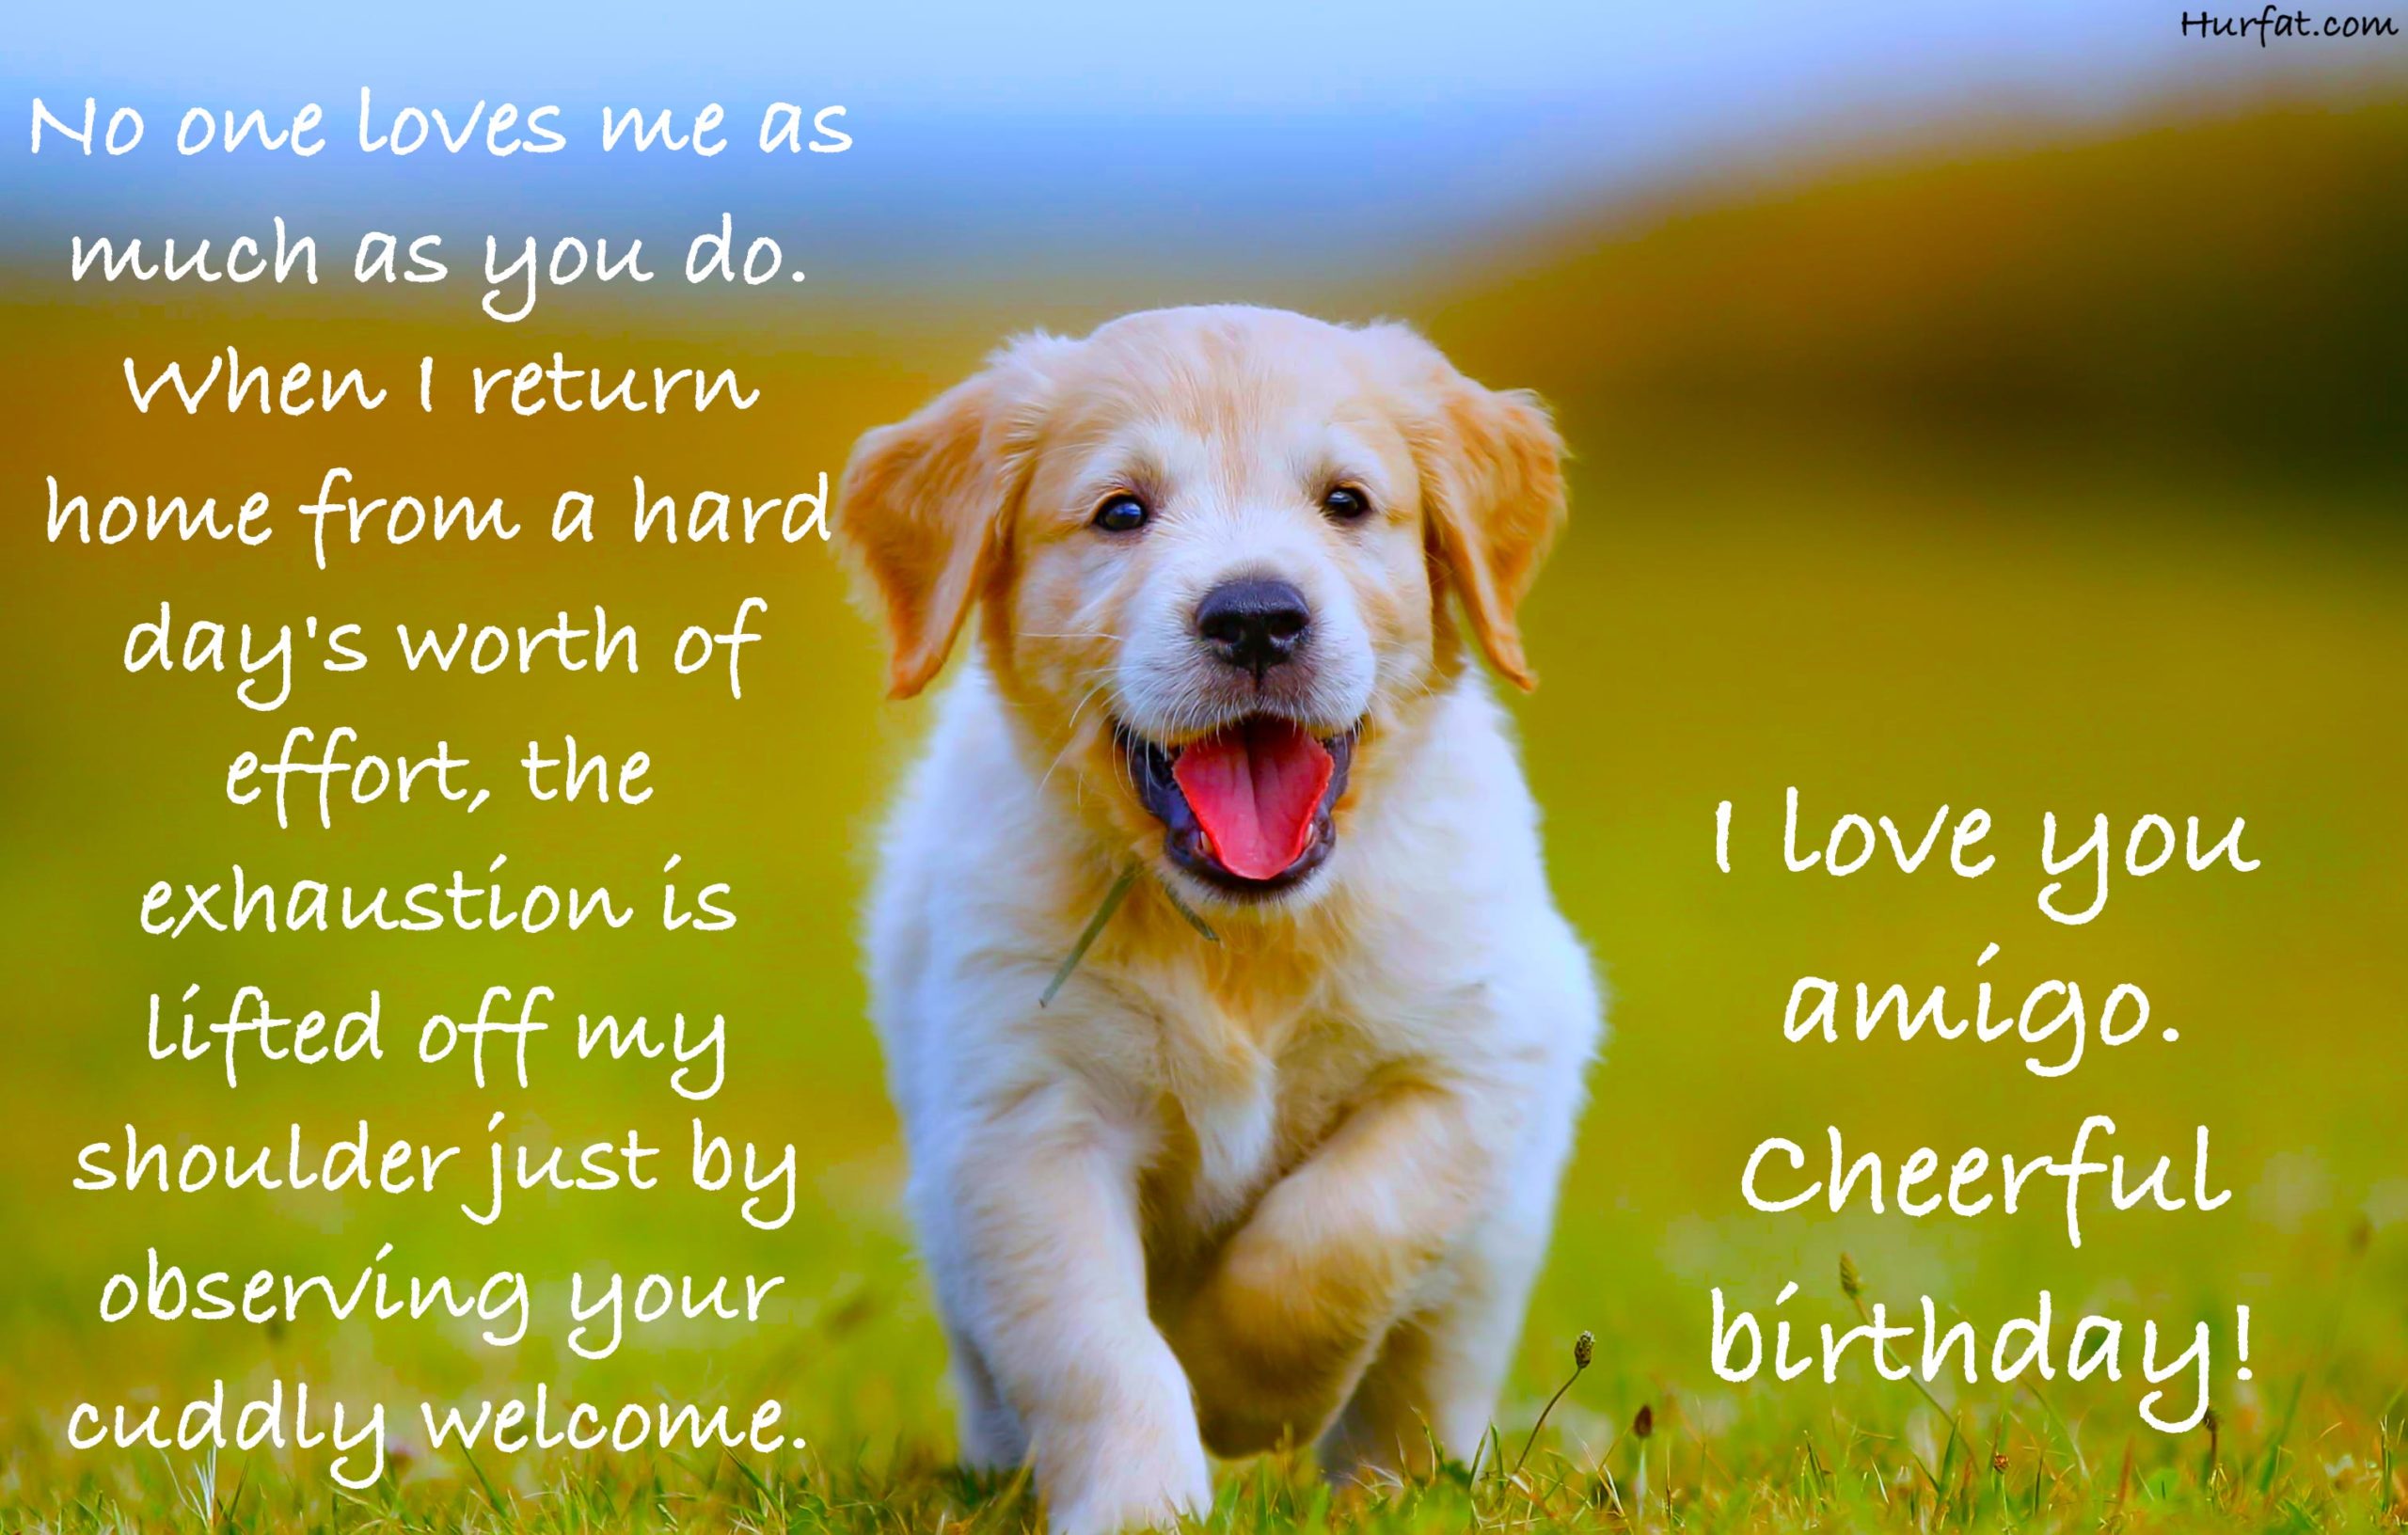 Best Birthday Wishes For you Dogs 50+ Wishes and Quotes